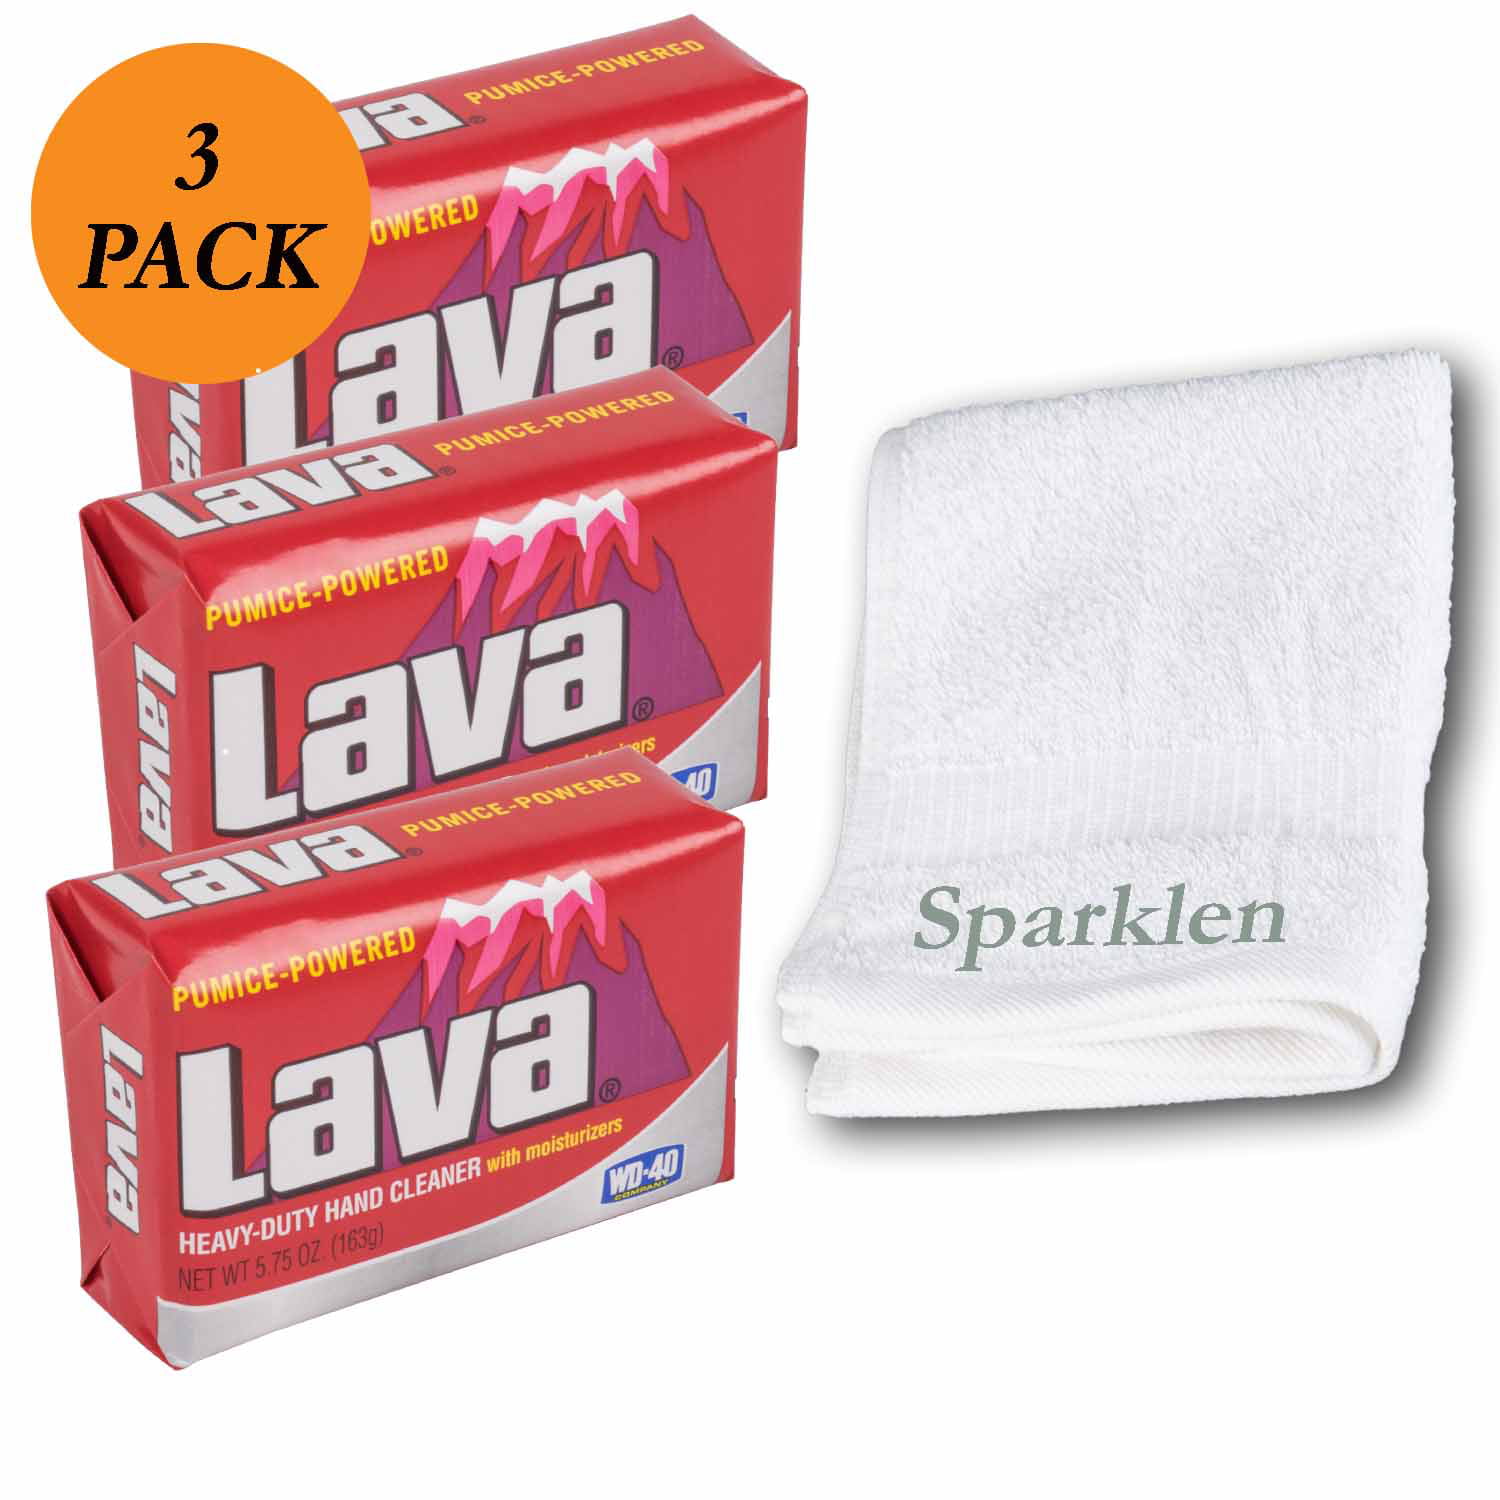 Lava 10185 Pumice Hand Cleaning and Moisturizing Bar Soap 5.75